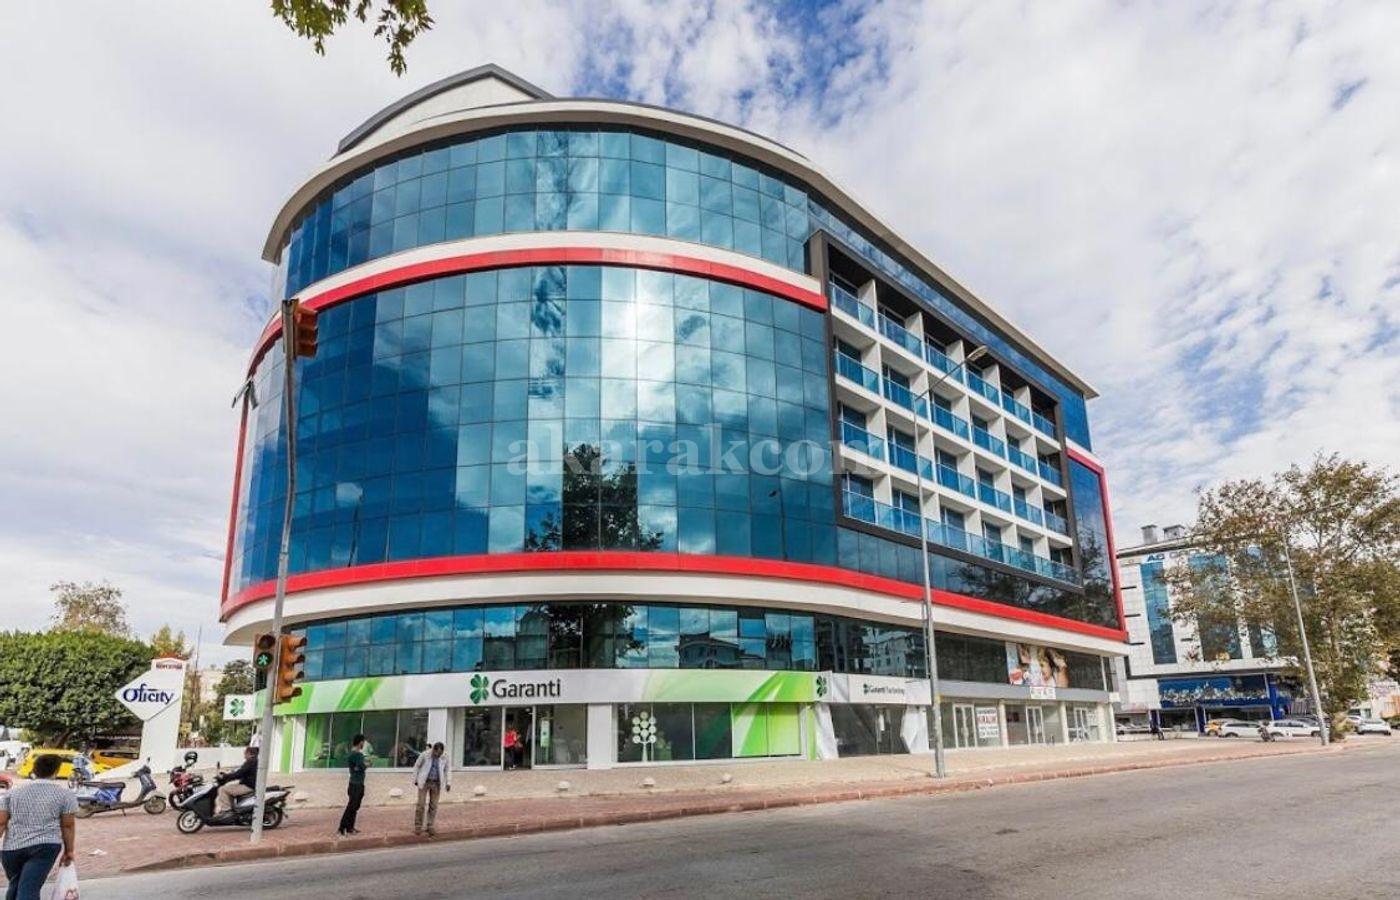 Office For Sale in Antalya Turkey | Commercial Office For Sale in Turkey